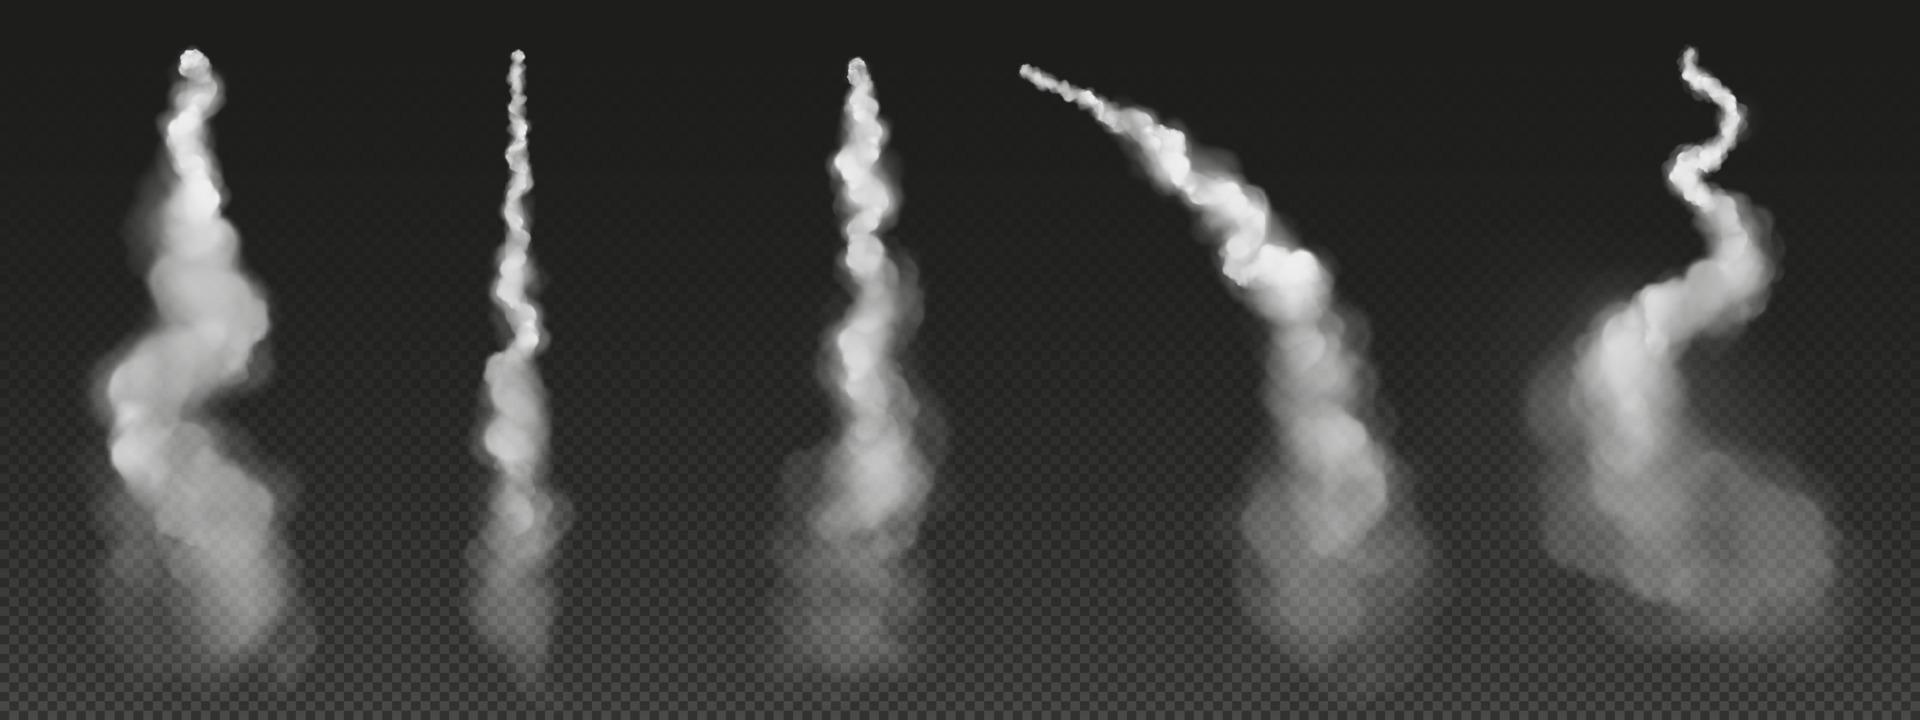 Rocket trail, airplane smoke, plane or jet clouds vector